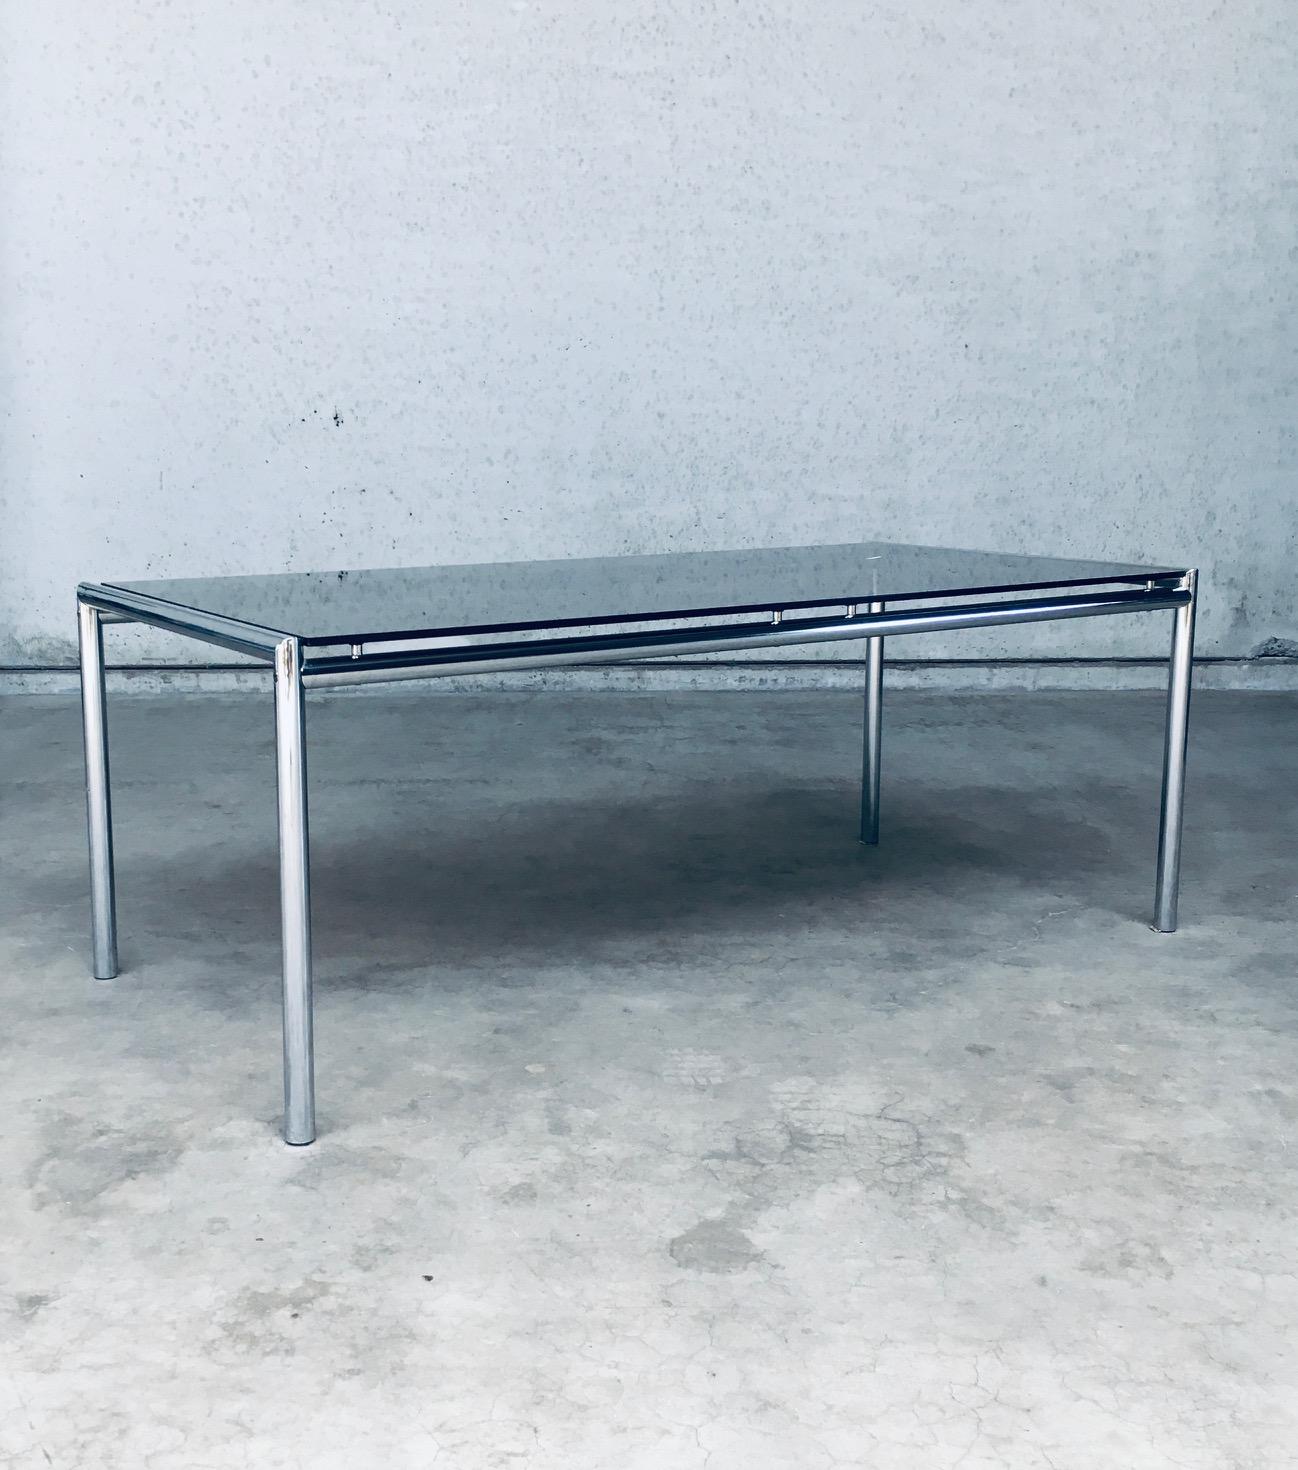 Vintage Midcentury Modern Italian Design Tubular Chrome & Smoke Glass Dining Table. Made in Italy, 1970's. Tubular steel frame with chrome finish and smoked glass table top. This table will easily seat 6 to 8. We have the matching dining chairs for